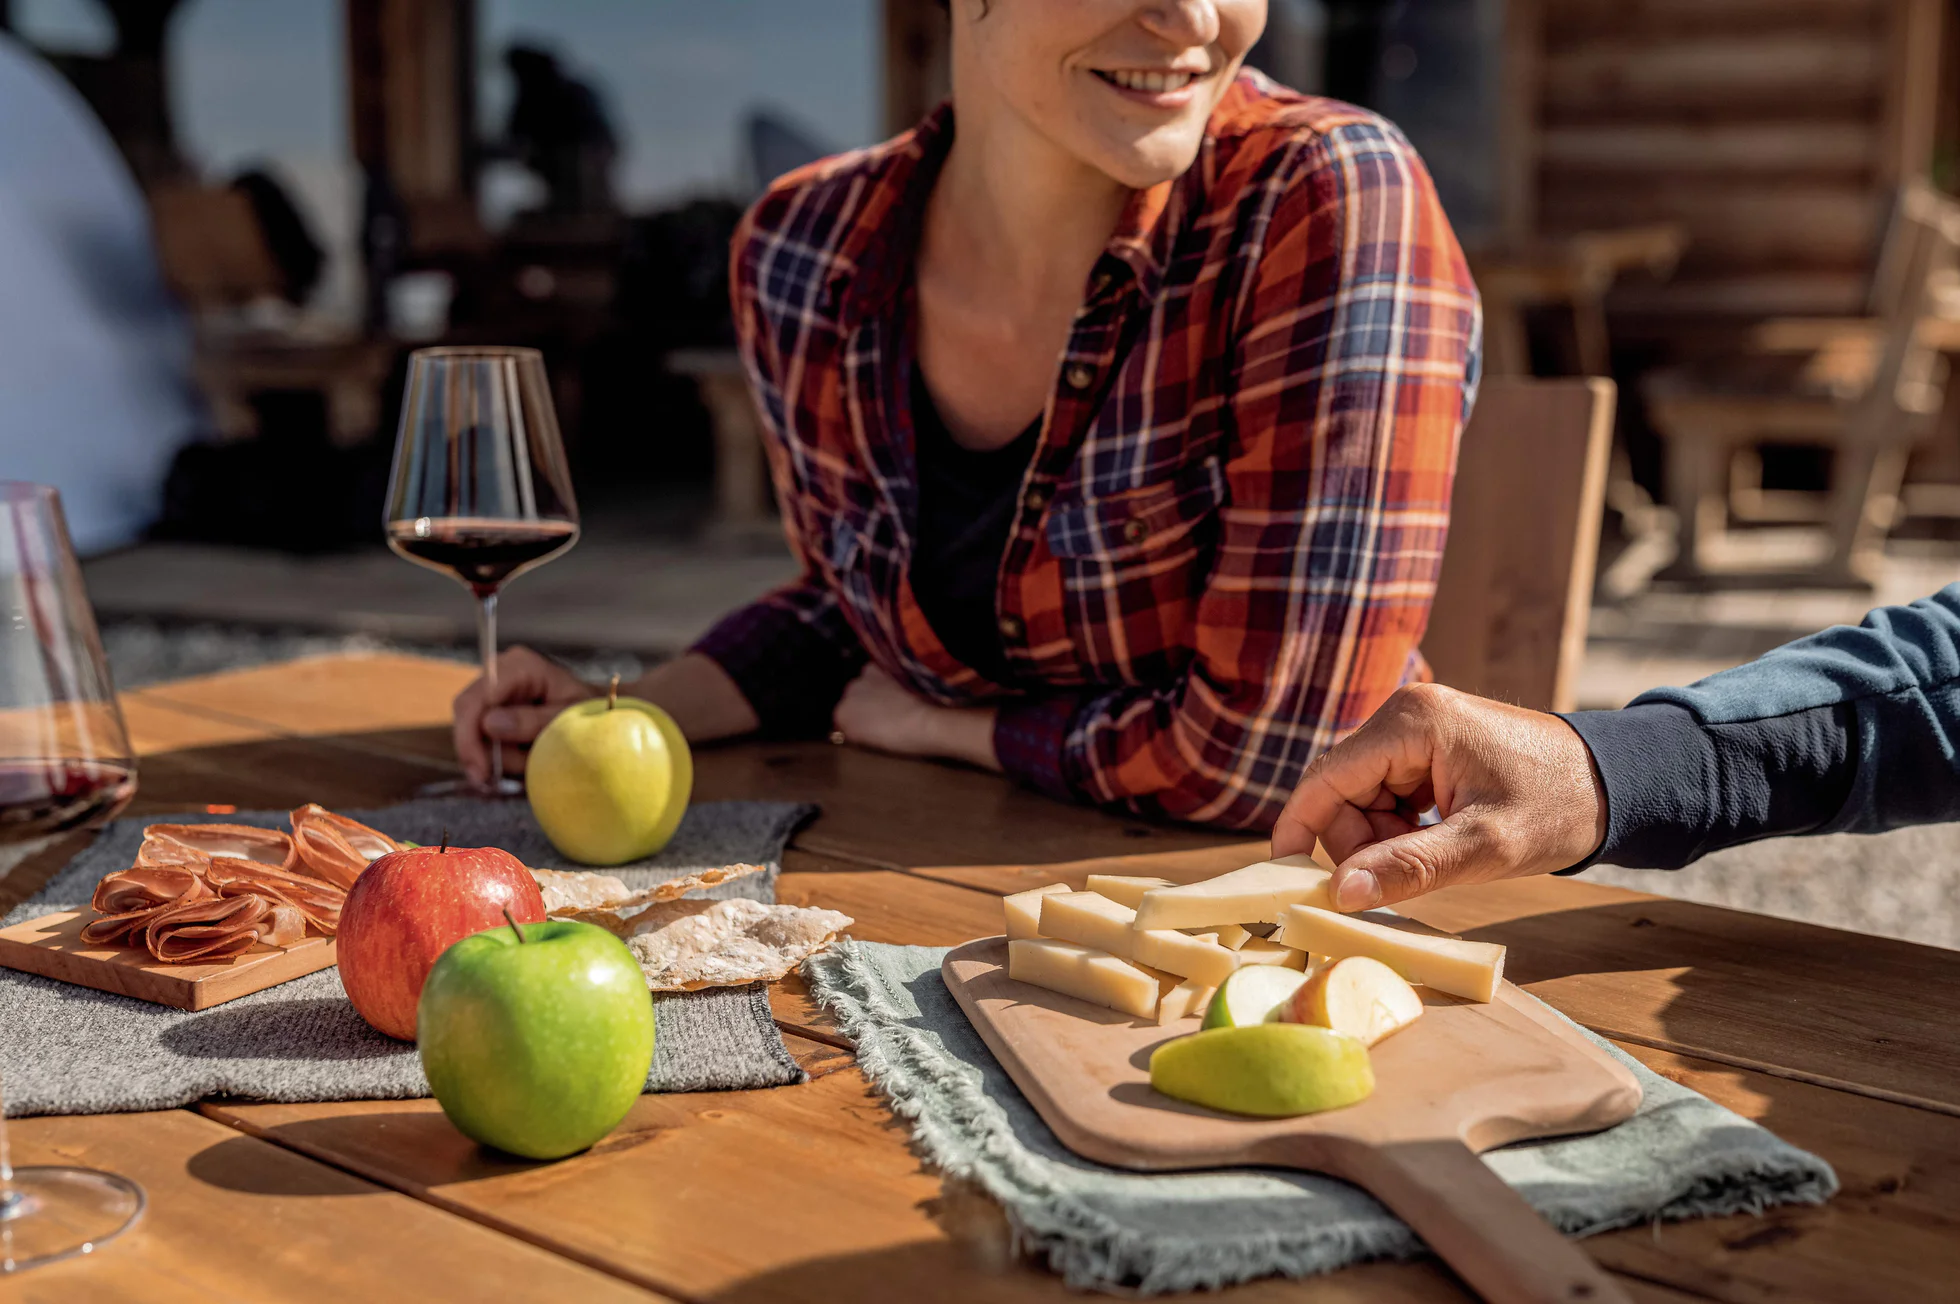 A woman and a man enjoy South Tyrolean specialities including apples, cheese and wine.